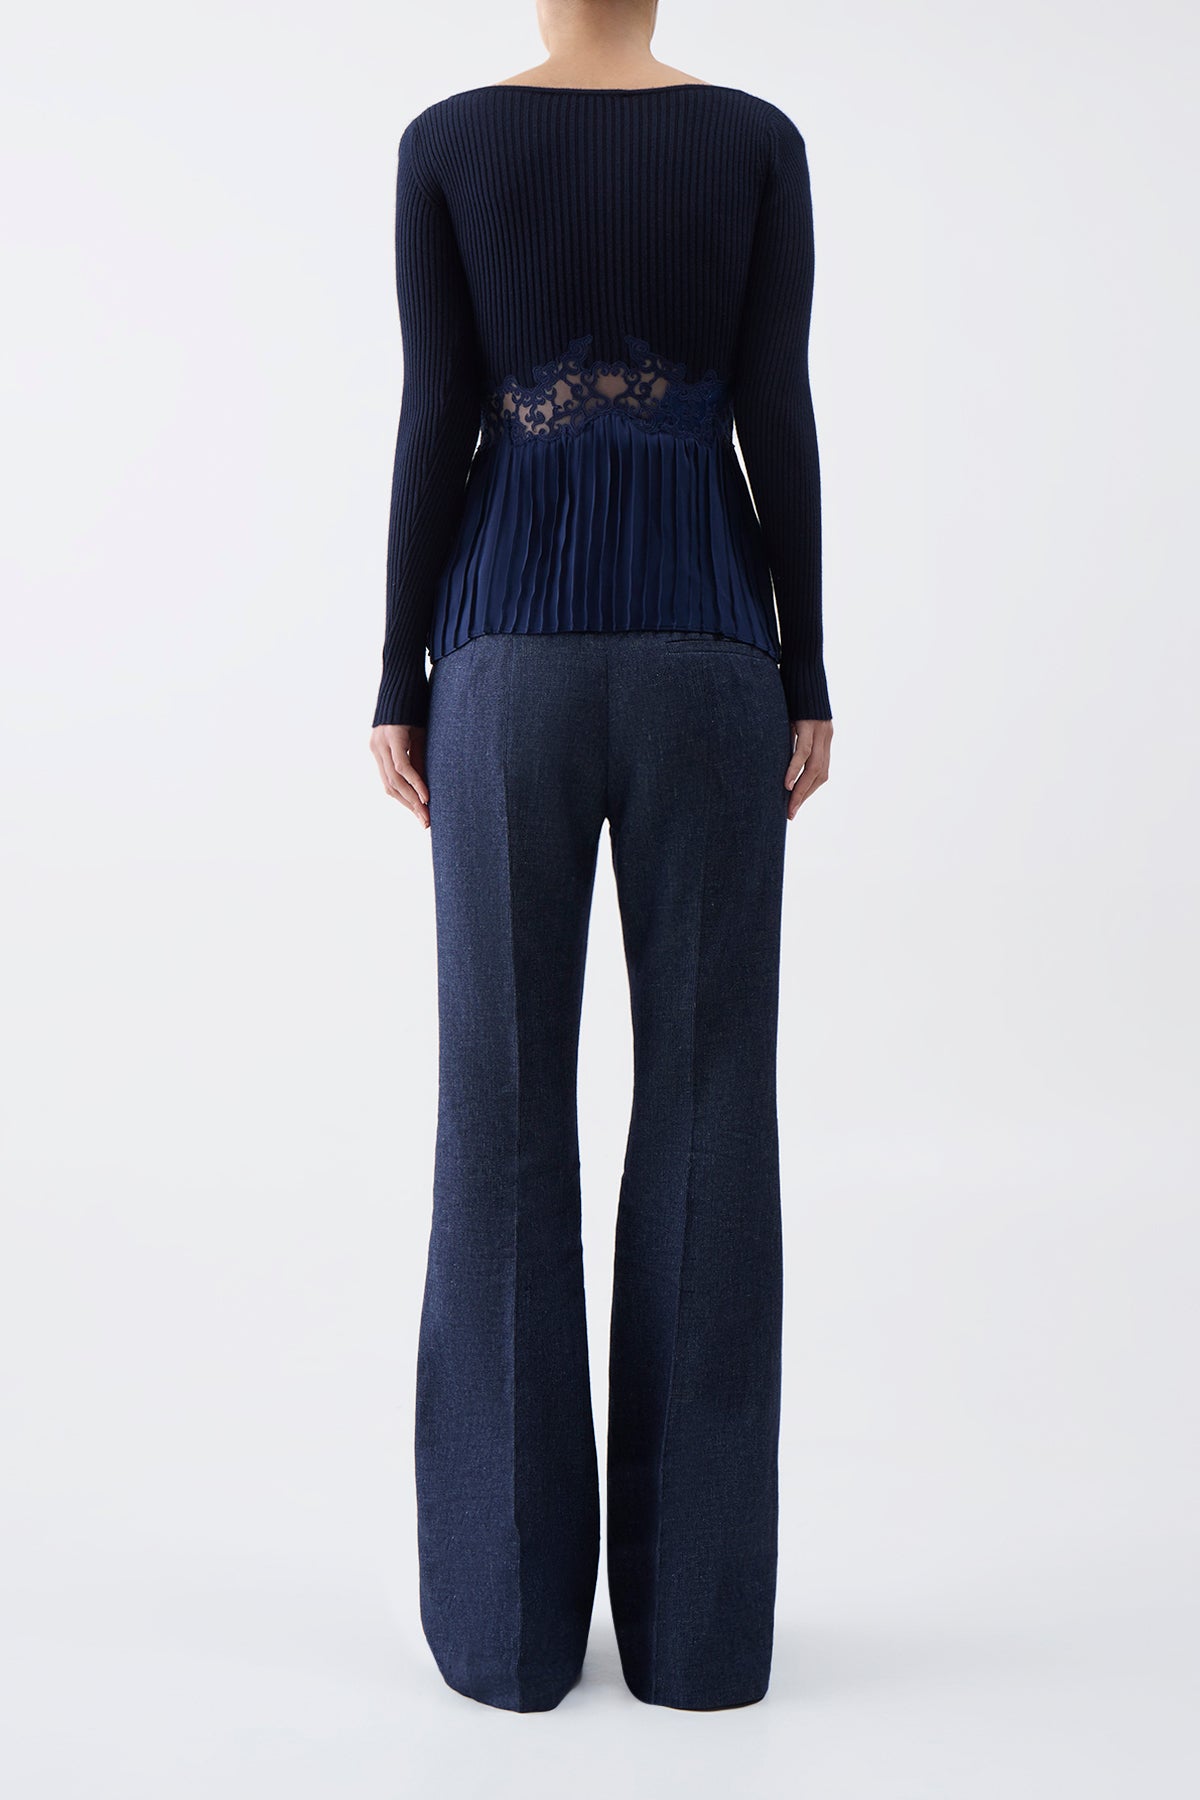 Fini Lace Top in Navy Silk Crepe